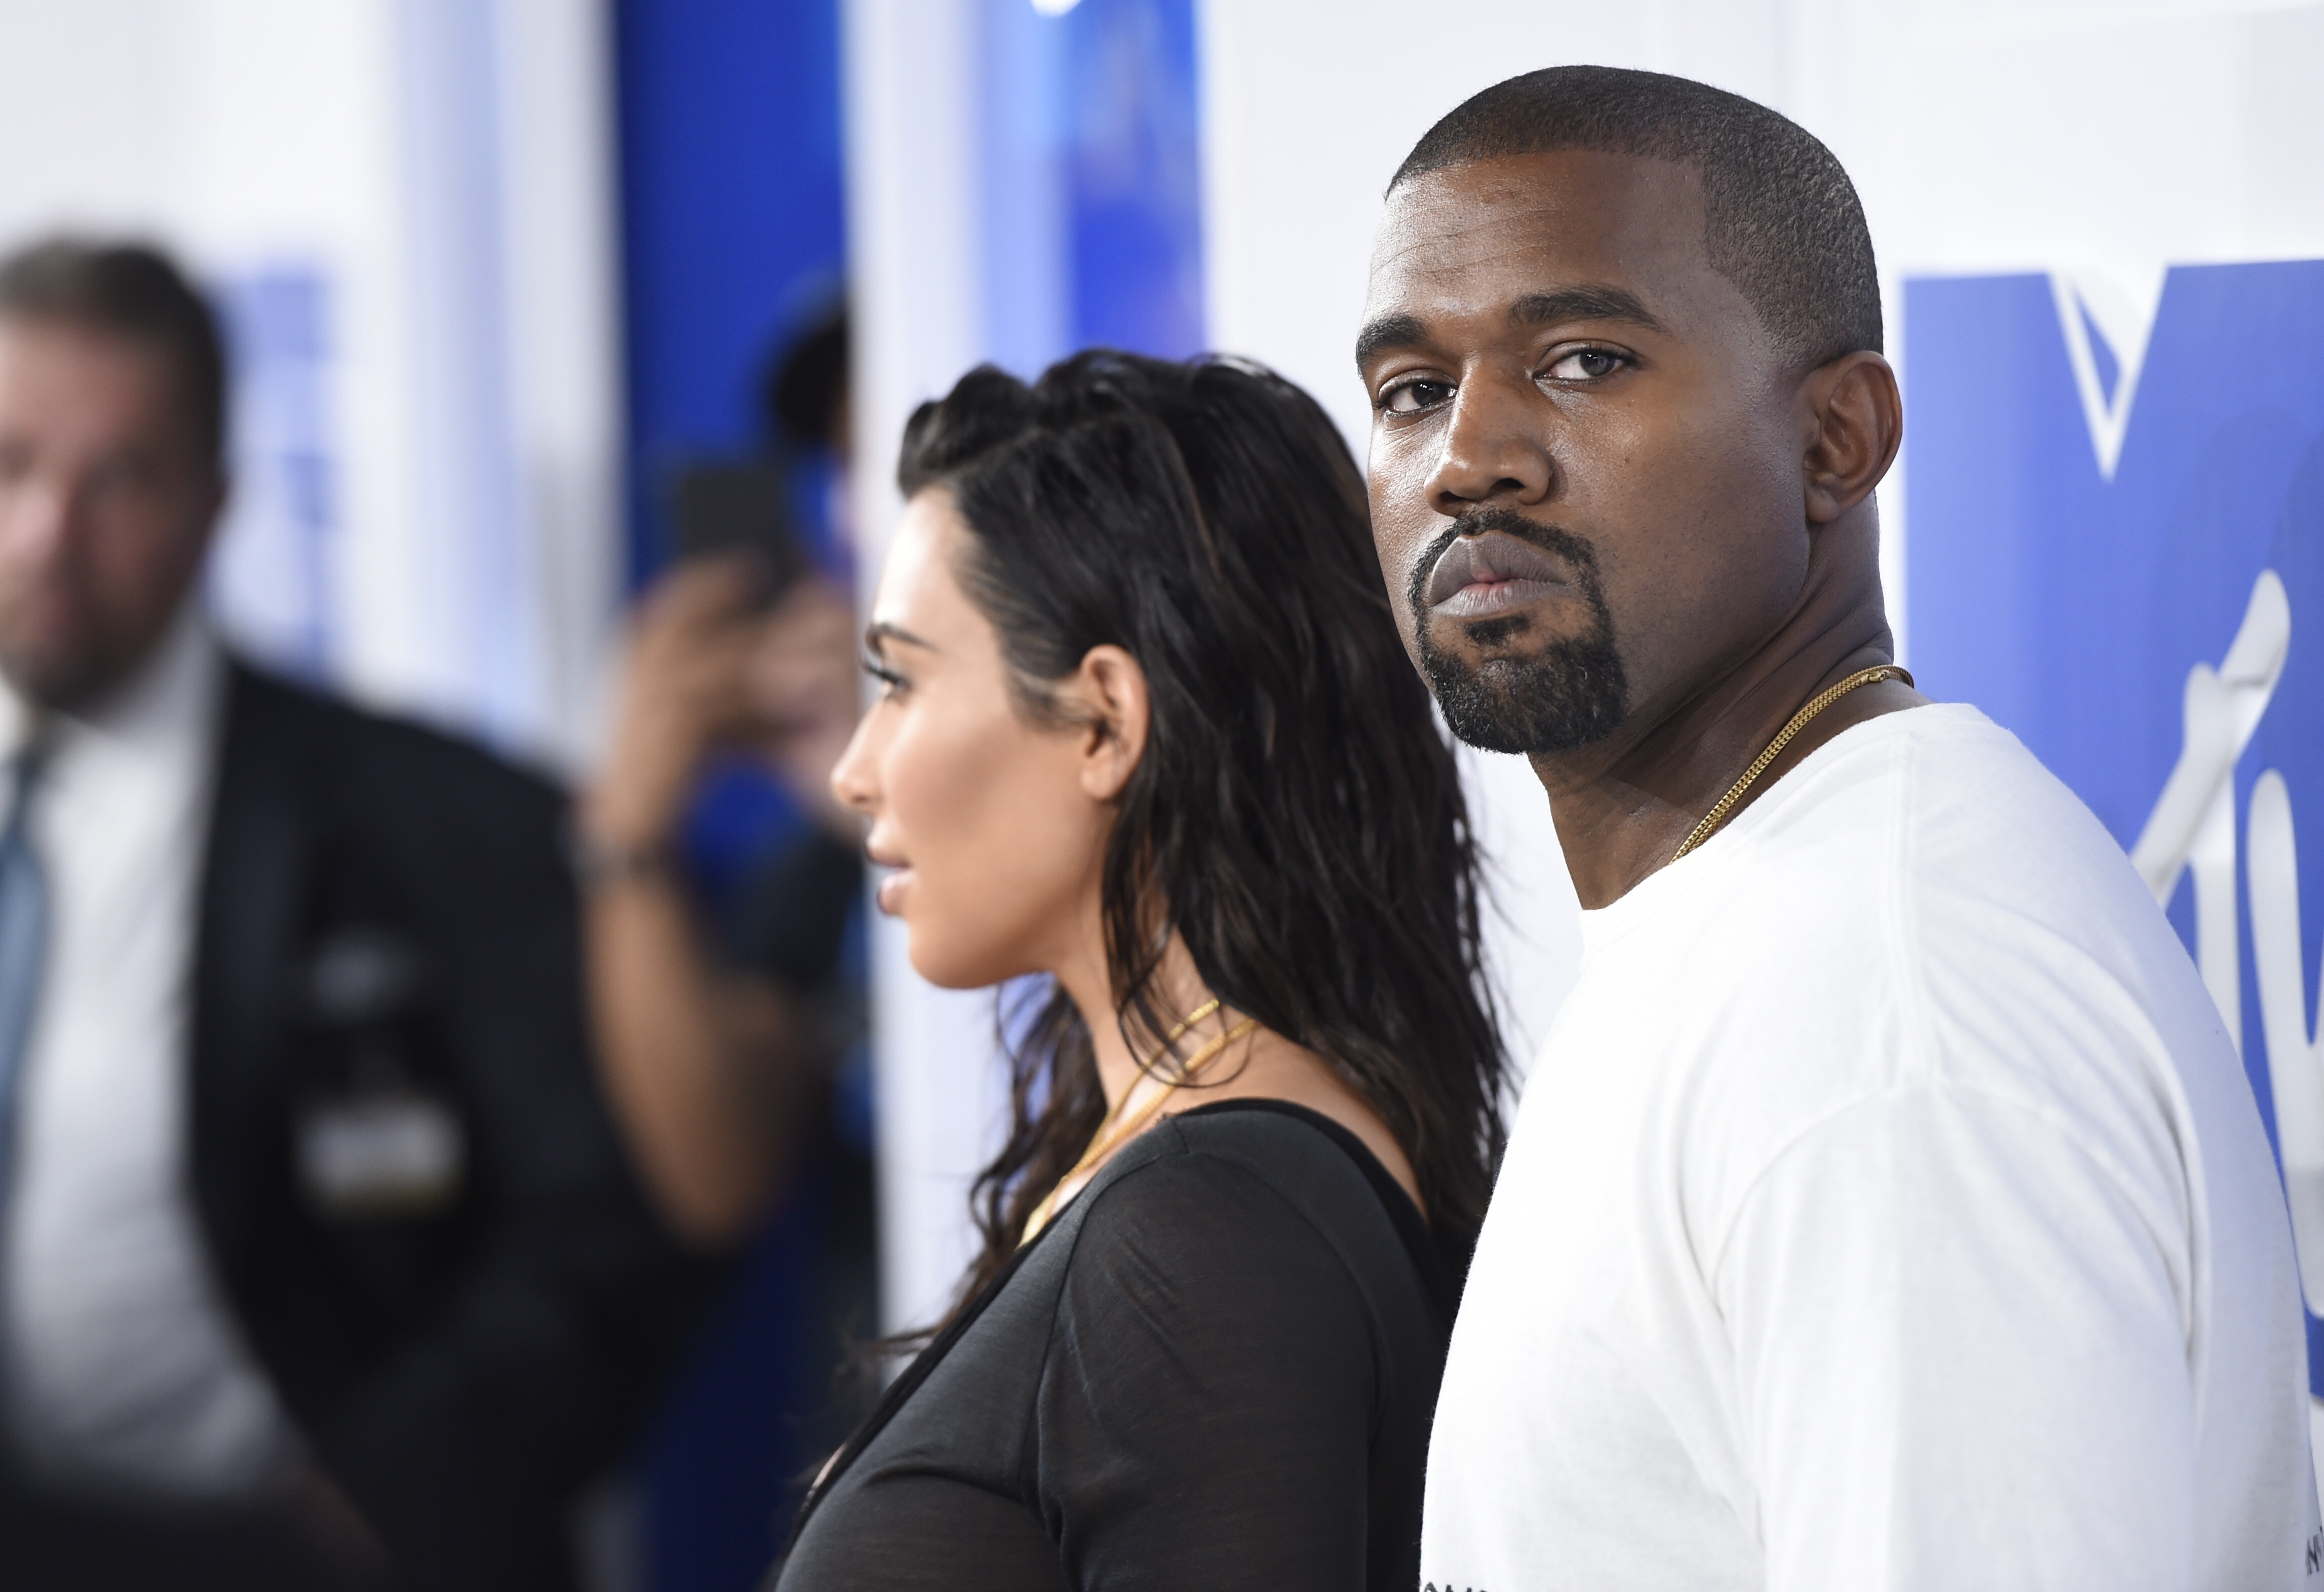 Kanye West has been campaigning to enter the three-comma club ever since his 22-year-old sister-in-law, Kylie Jenner, was named the world’s youngest self-made billionaire. Photo: AP